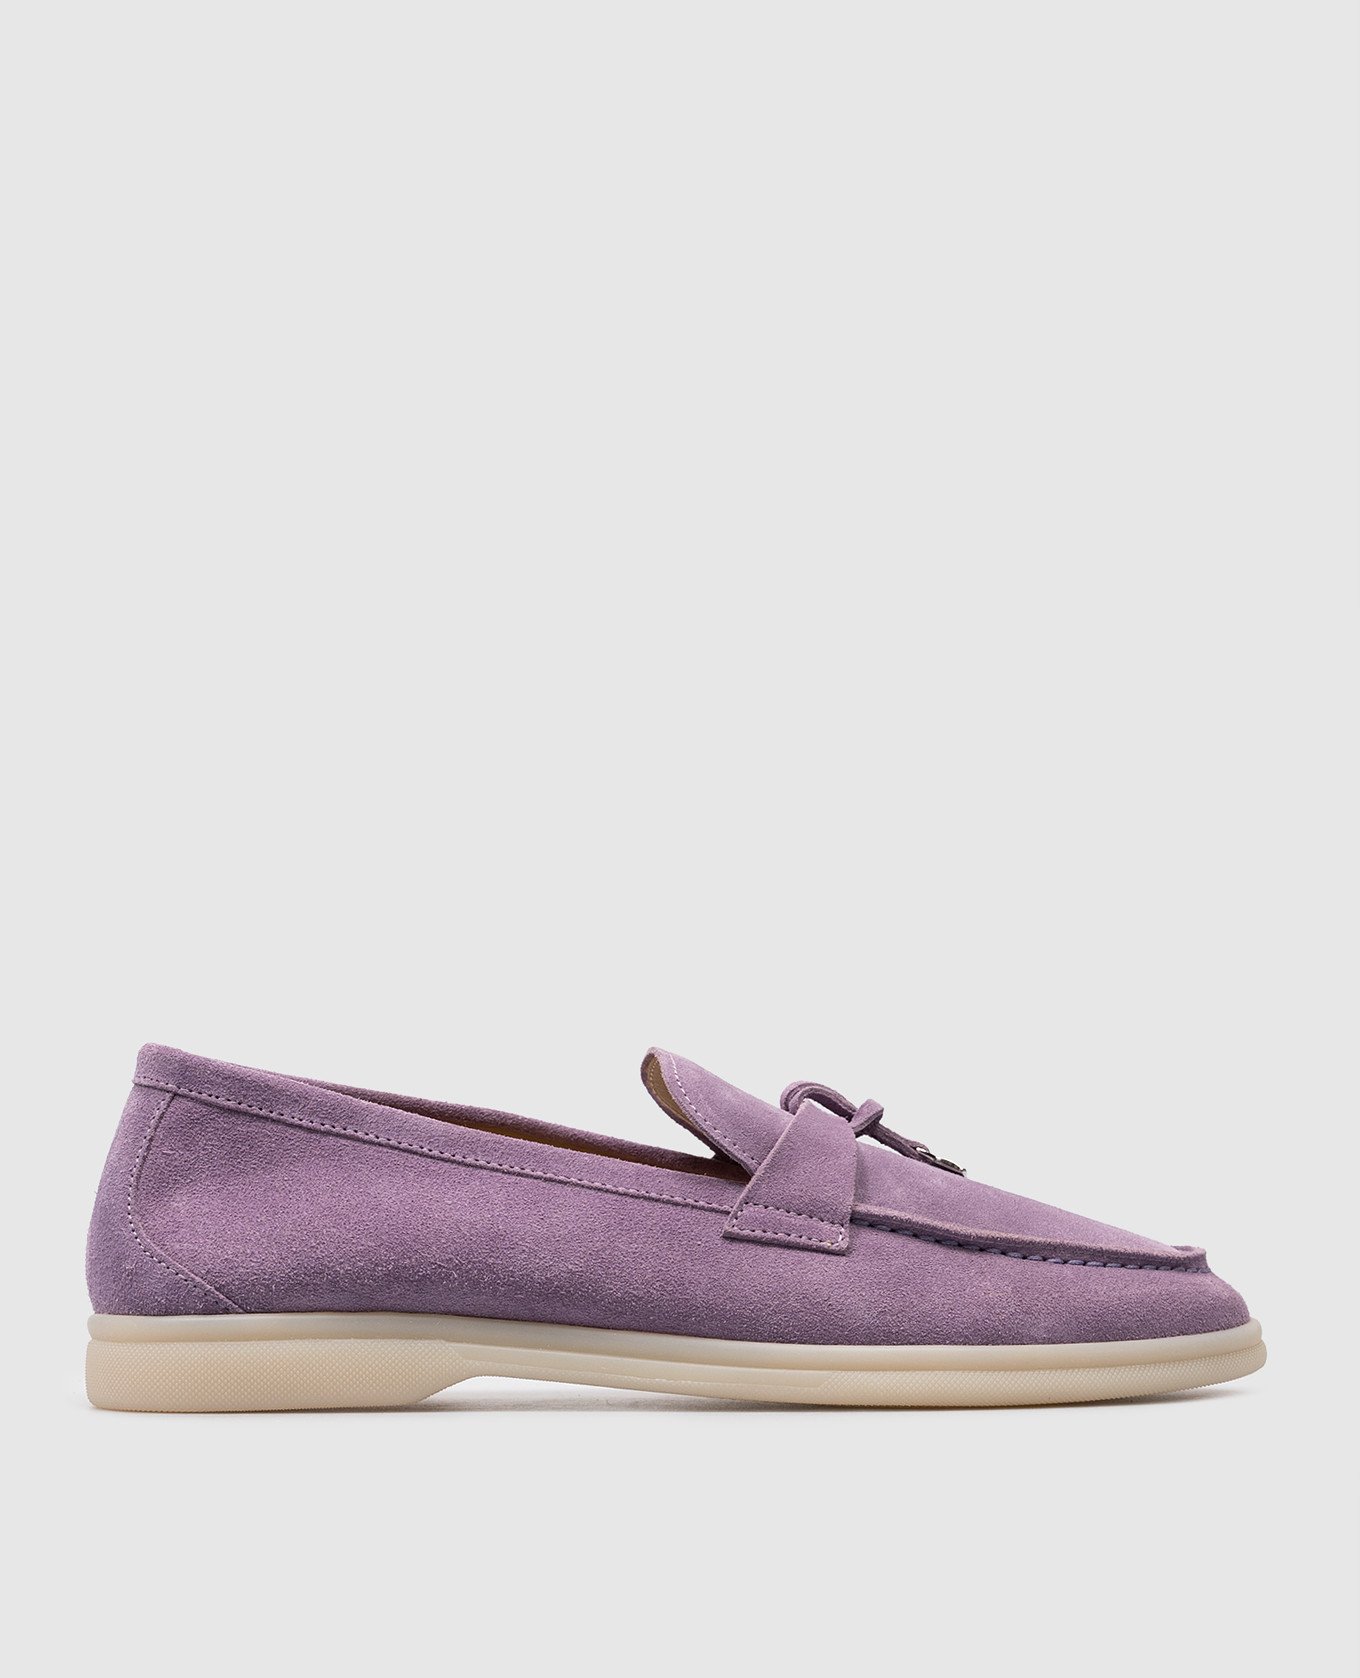 Purple suede loafers with metallic logo